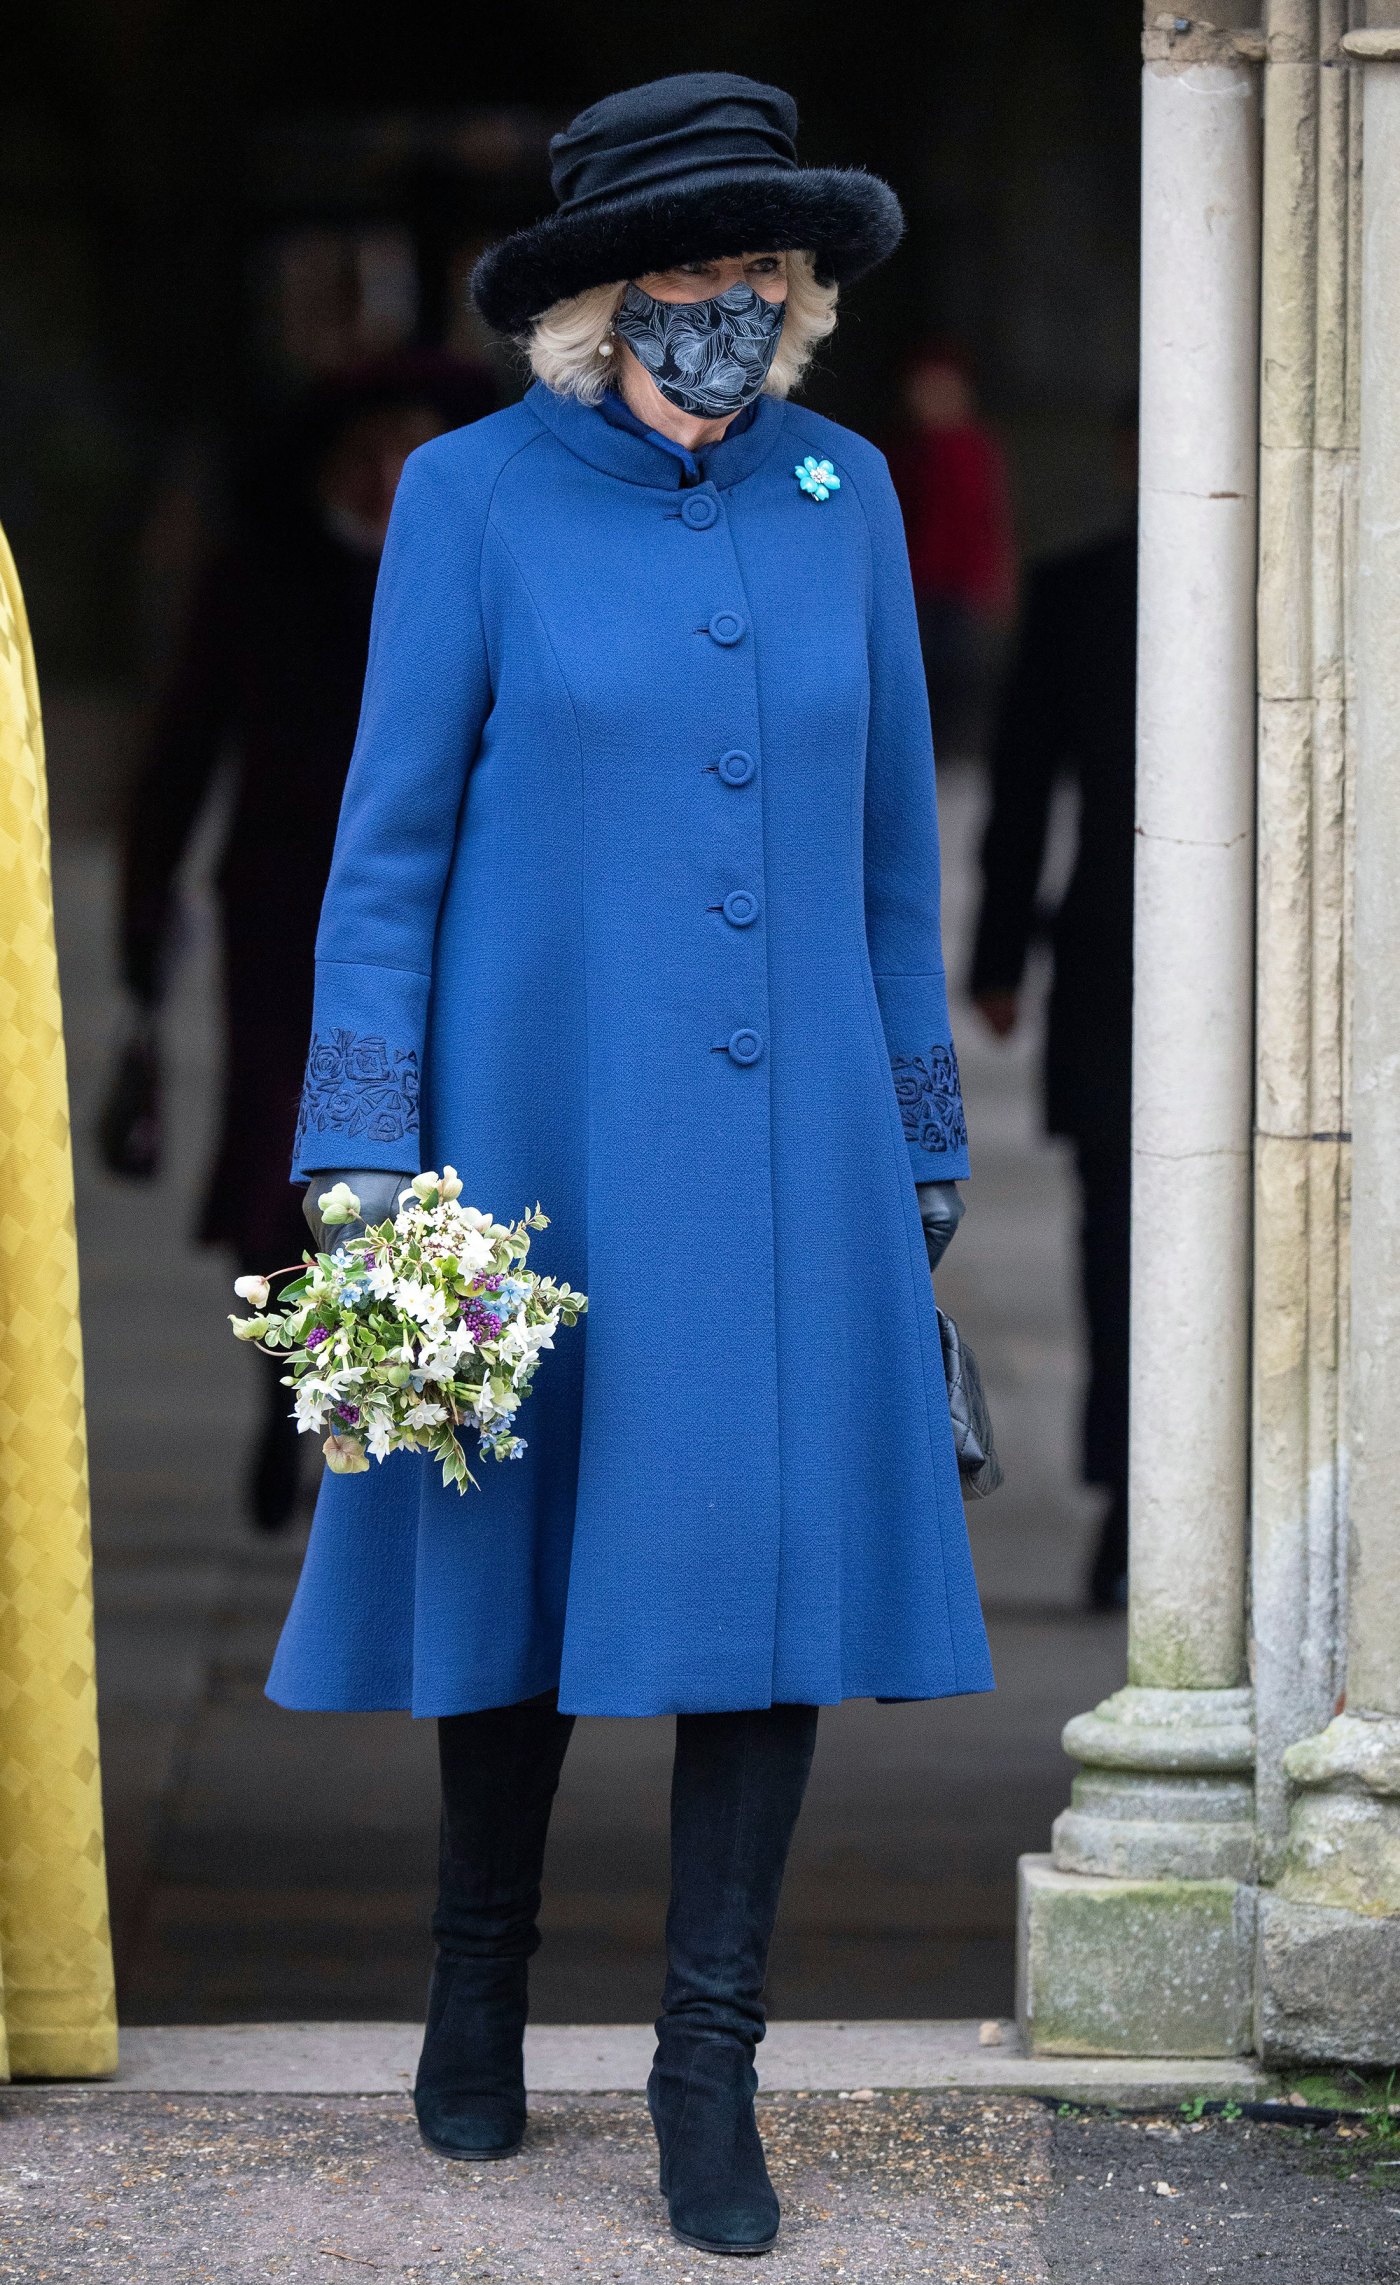 Camilla Parker-Bowles Royal Fashion: Best Outfits and Dresses